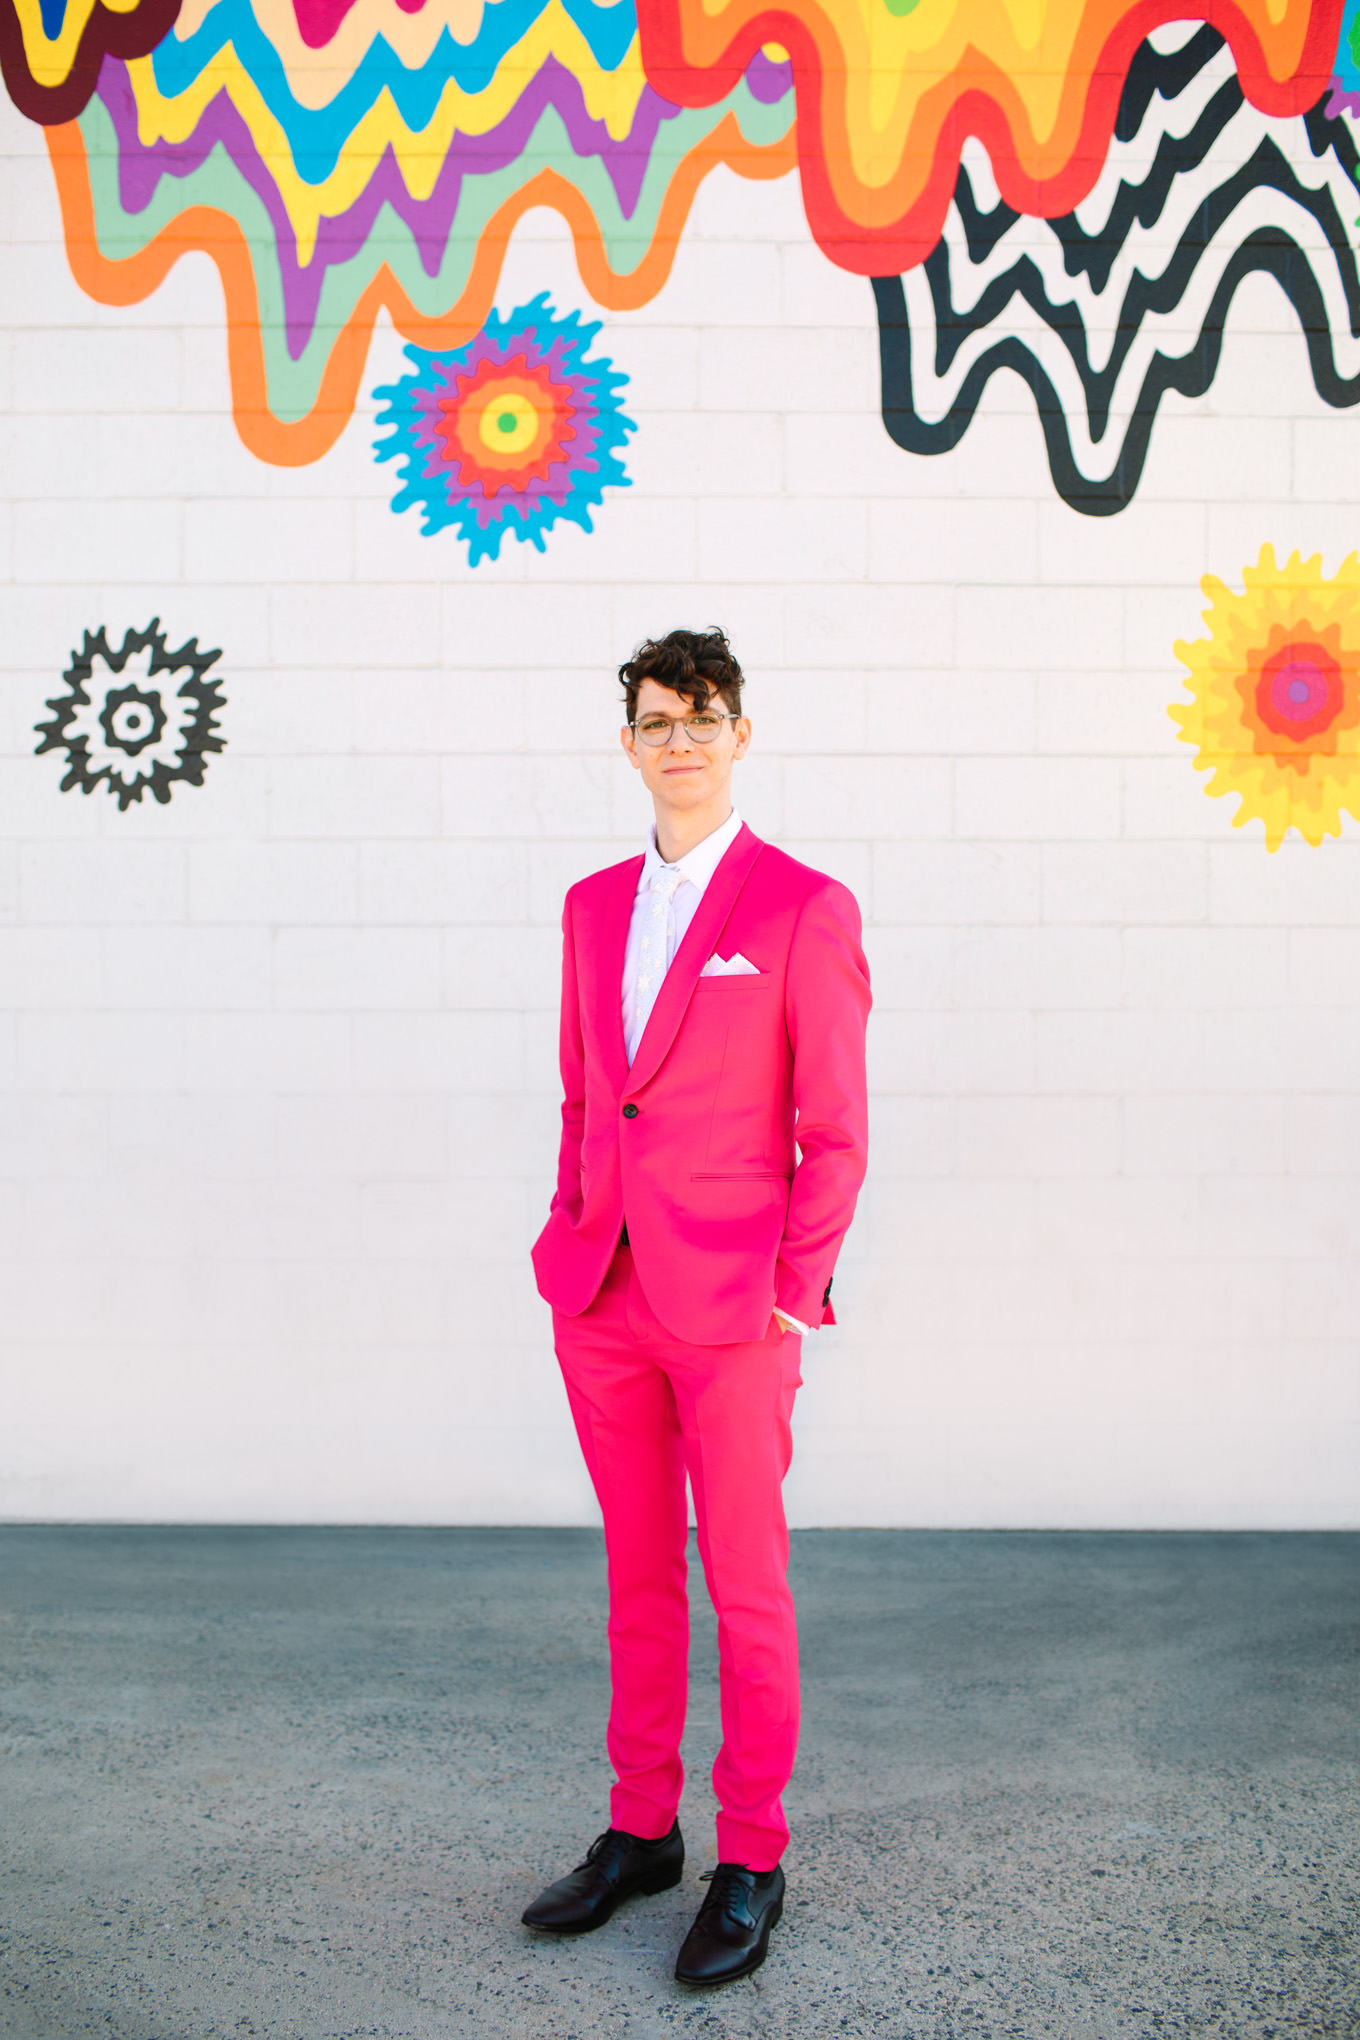 Groom in hot pink suit in front of rainbow mural DTLA | Colorful wedding at The Unique Space Los Angeles published in The Knot Magazine | Fresh and colorful photography for fun-loving couples in Southern California | #colorfulwedding #popupwedding #weddingphotography #microwedding Source: Mary Costa Photography | Los Angeles